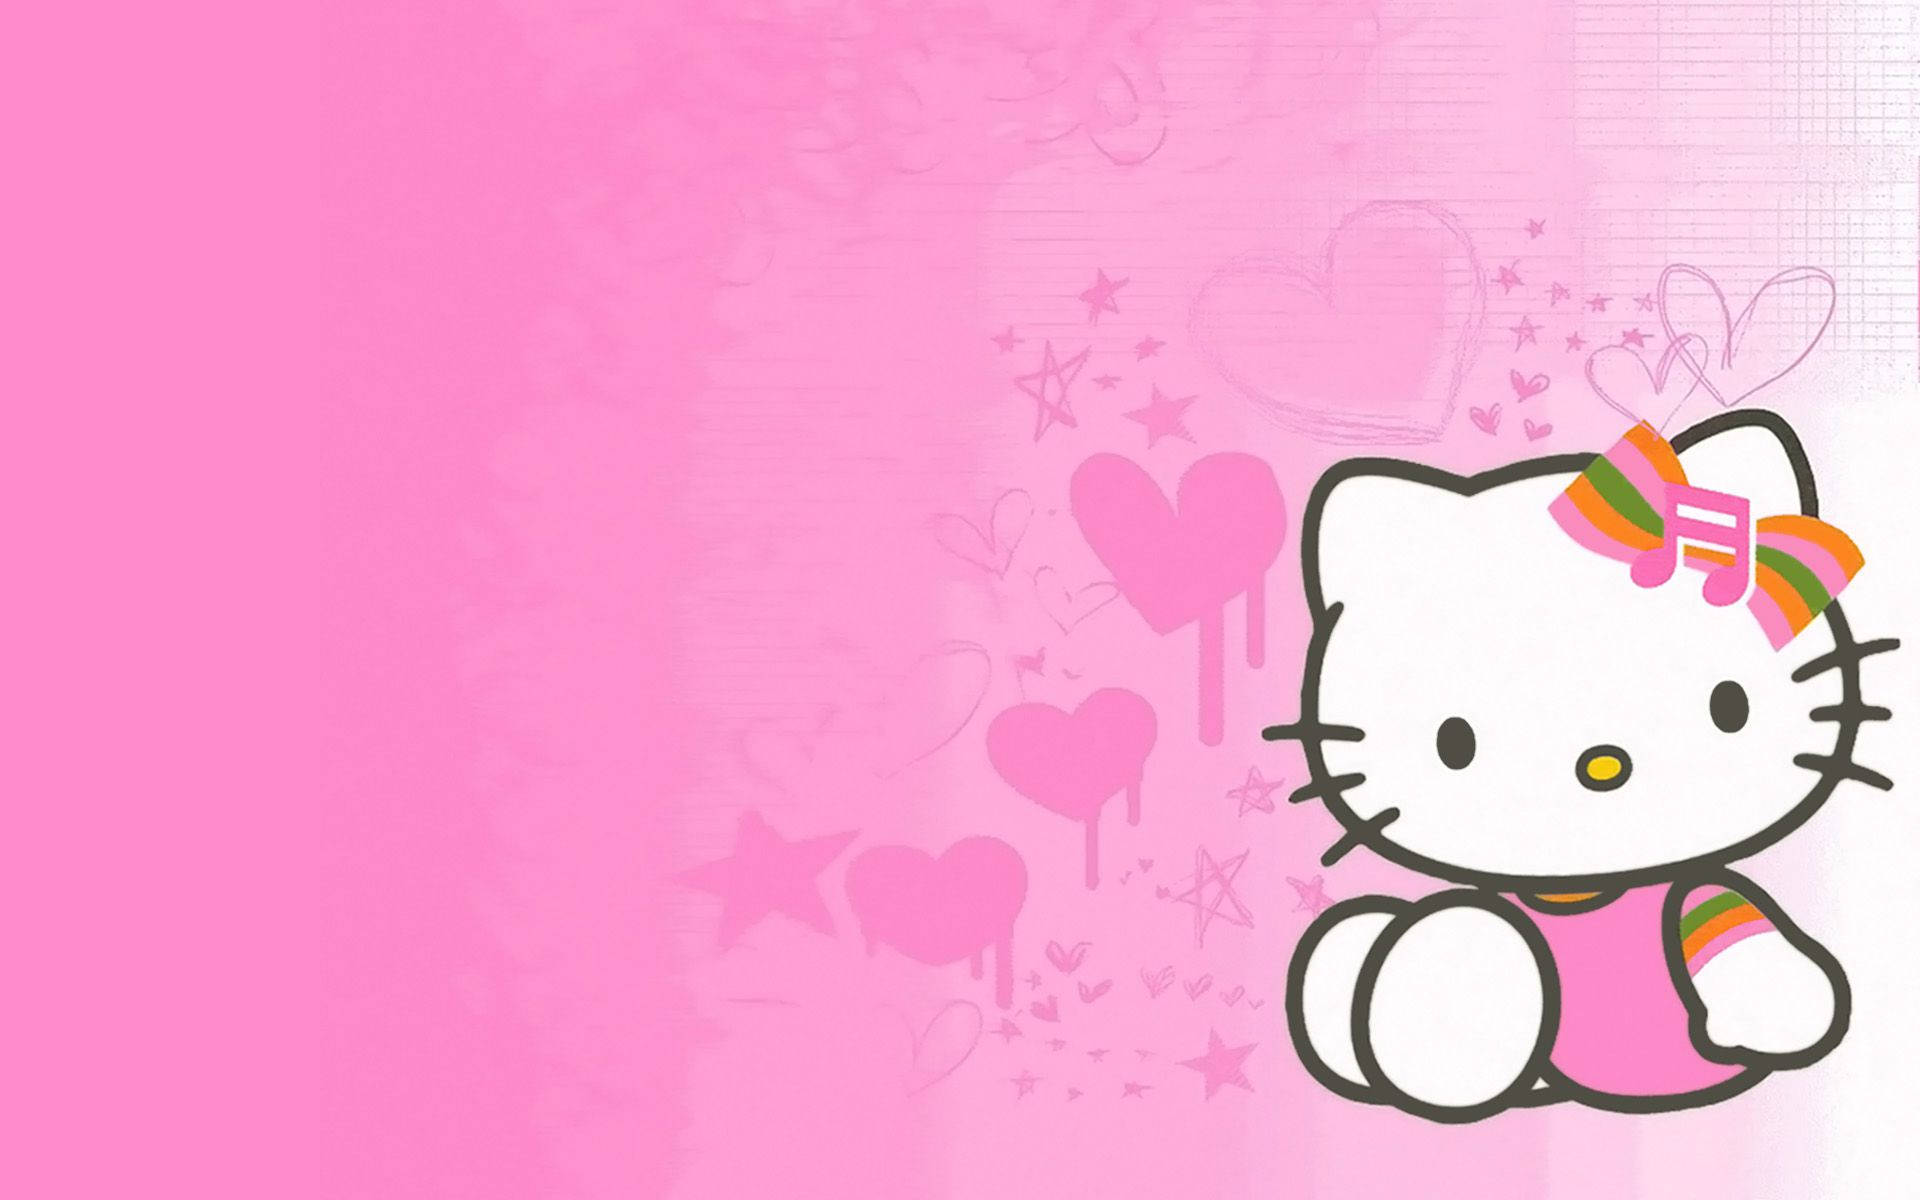 100+] Hello Kitty Aesthetic Wallpapers for FREE 